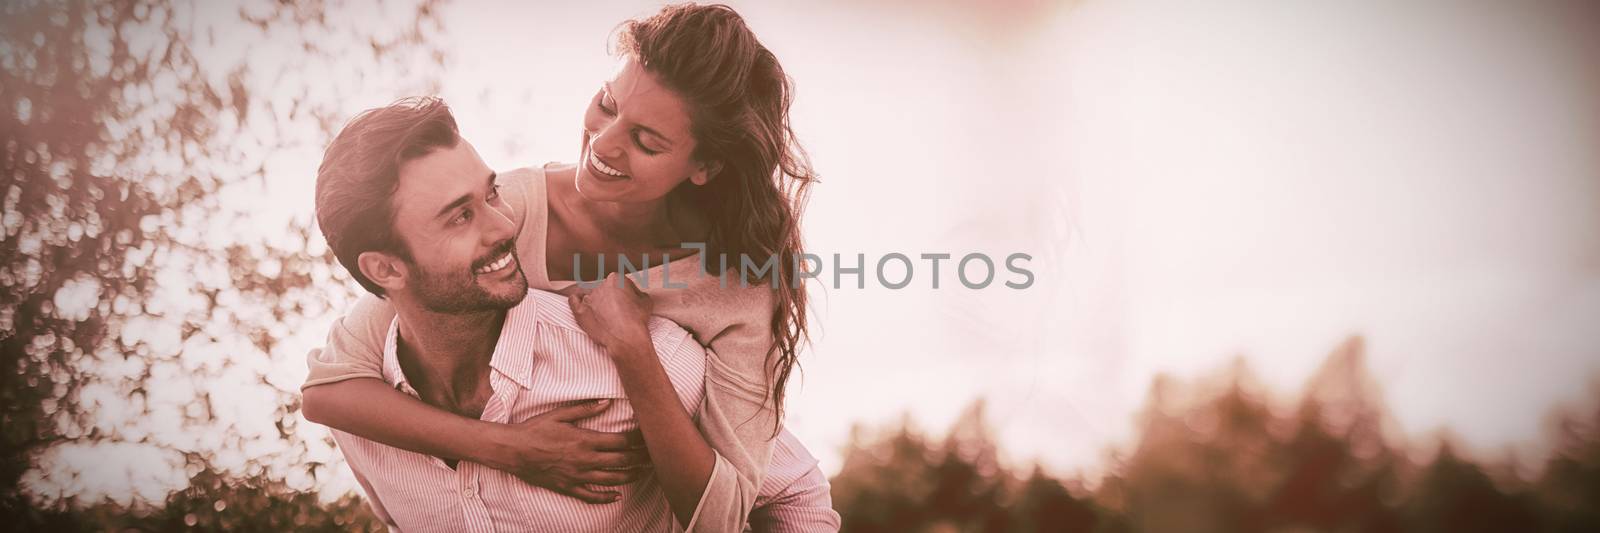 Young man piggybacking woman at farm during sunny day by Wavebreakmedia